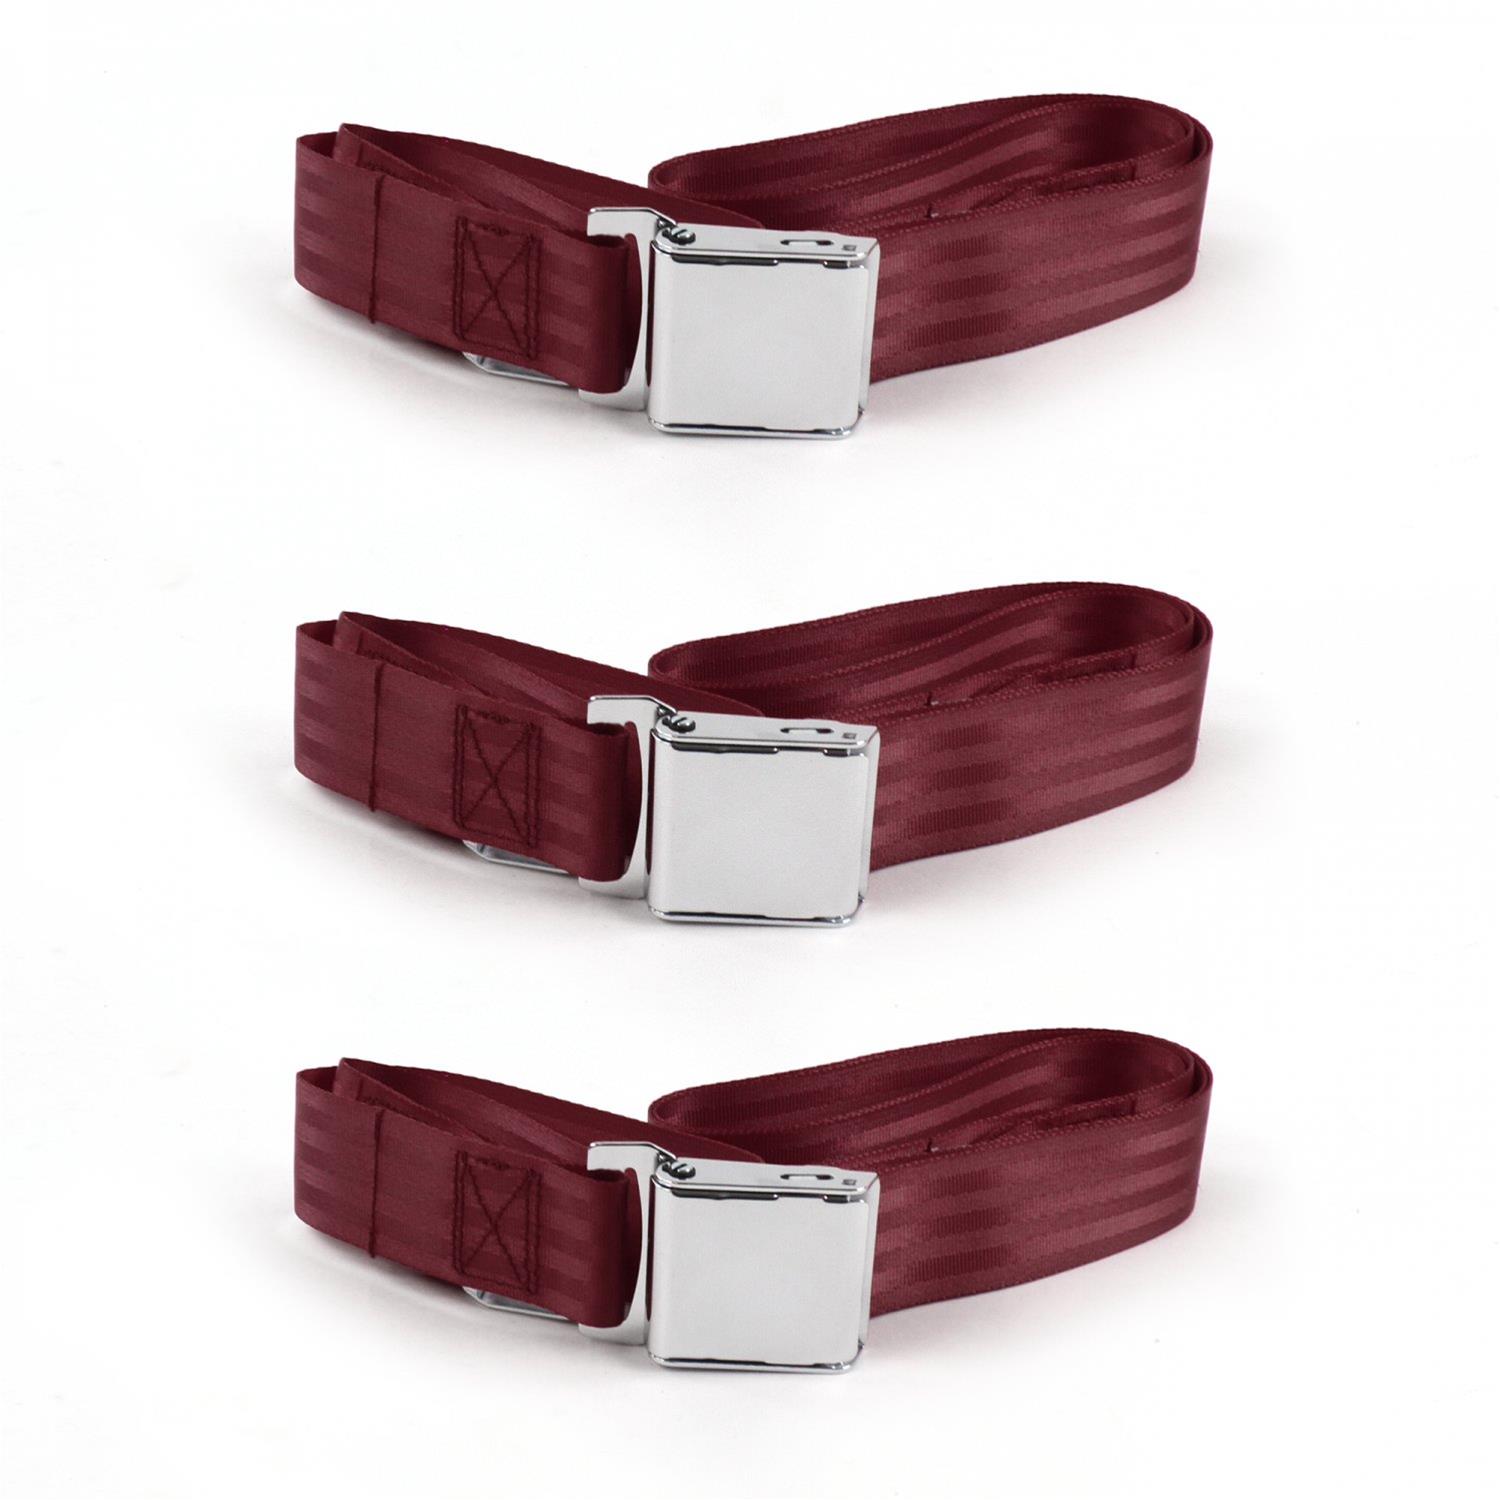 SafeTBoy STBCDED7 SafeTBoy 2-Point Airplane Buckle Lap Belts | Summit Racing